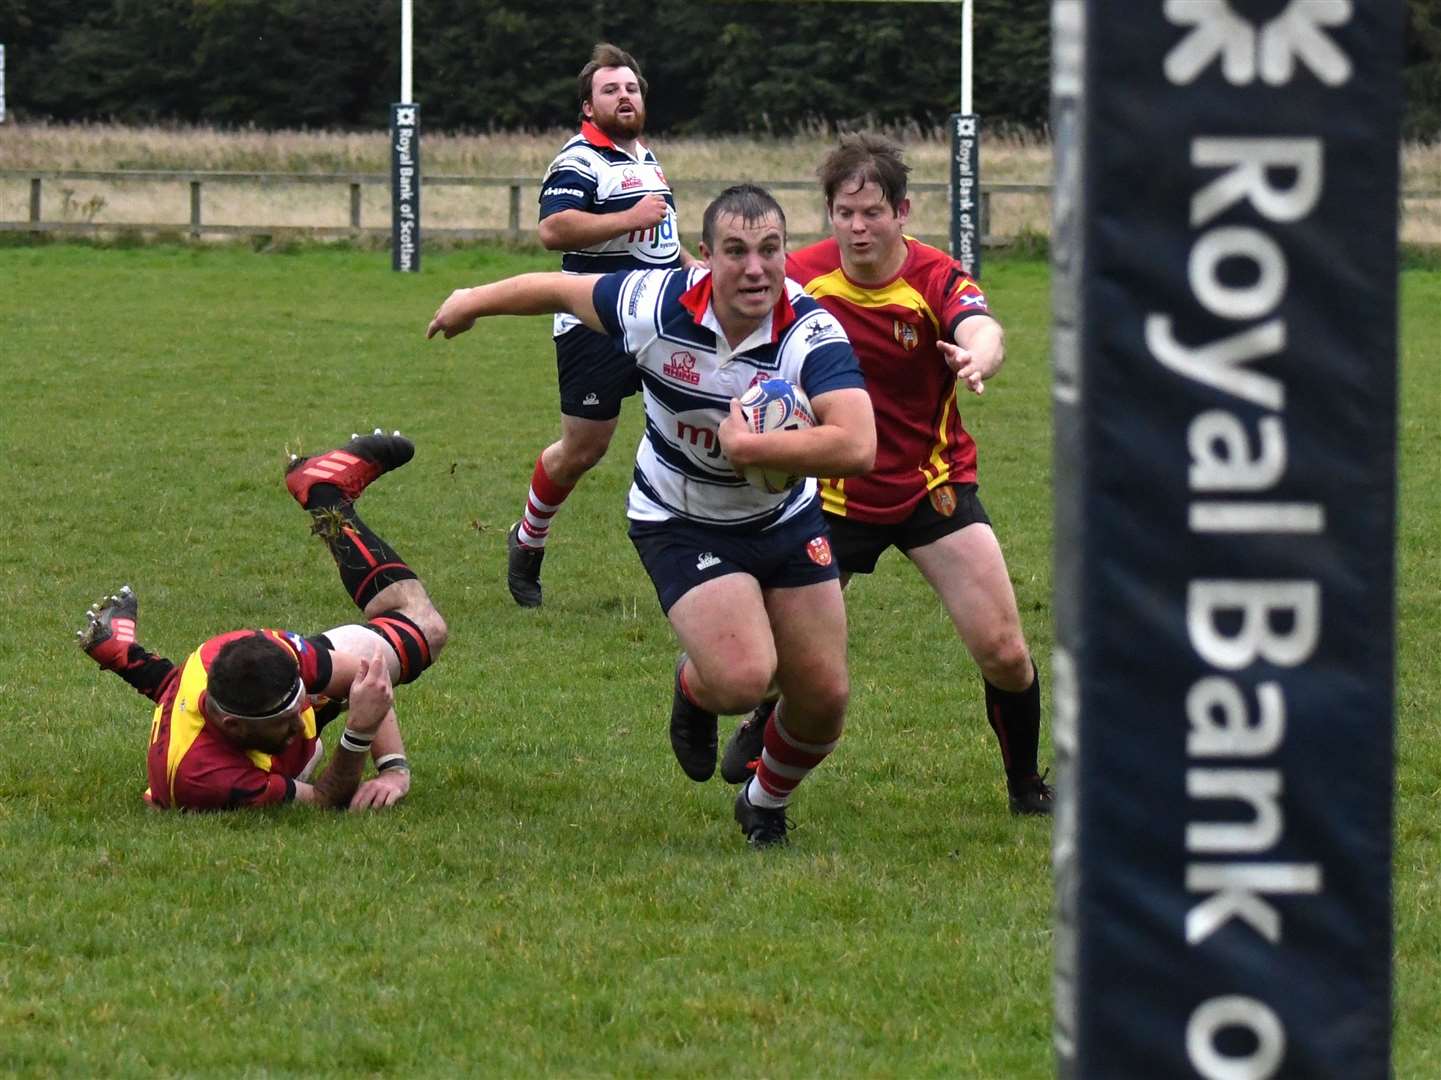 Cameron Hughes, having handed off second row, goes for line to score. Photo: James Officer